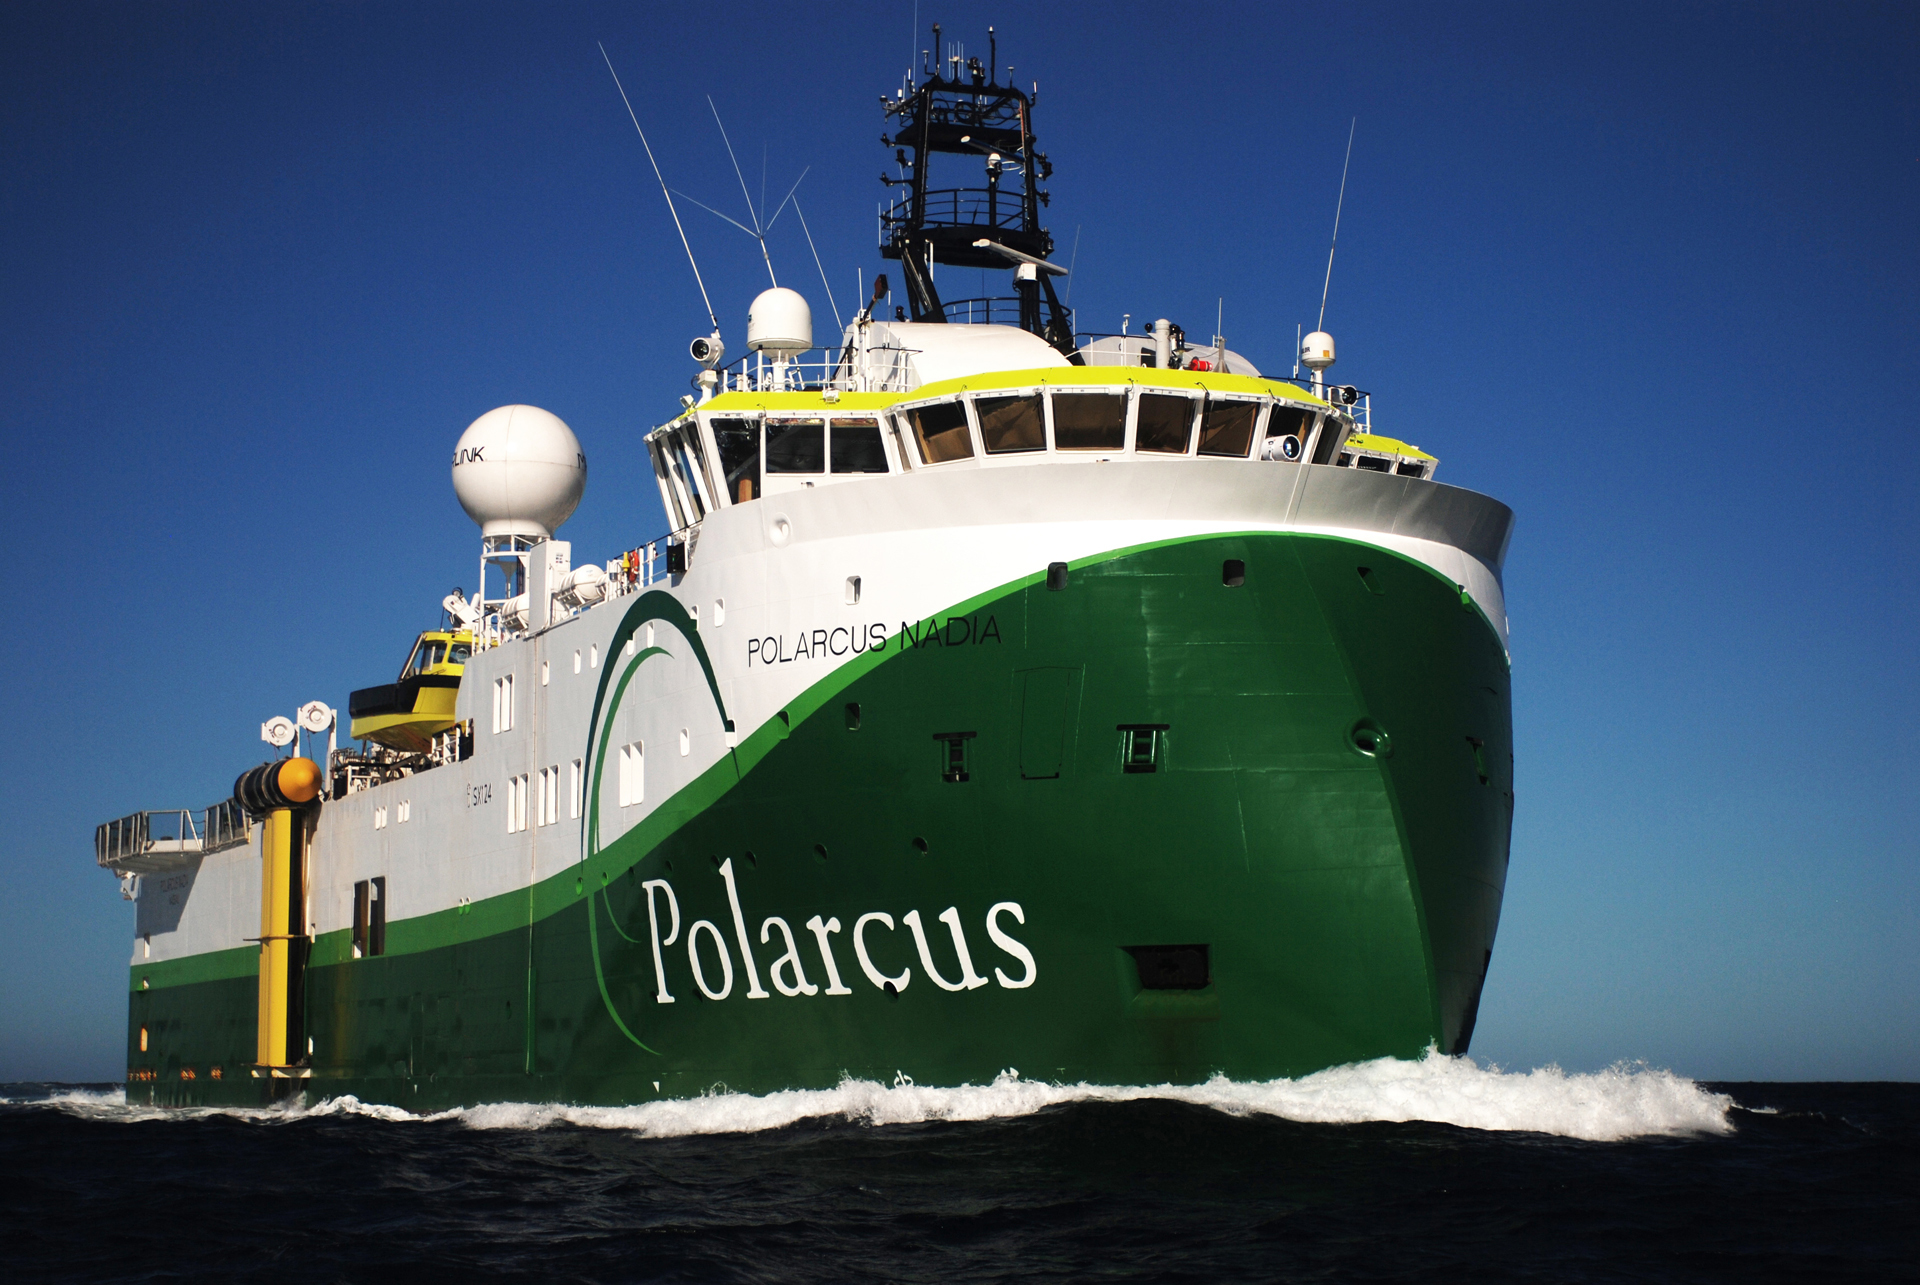 Polarcus has issued notices of termination to employees as its lenders begin a process of selling off nearly all of its vessels.